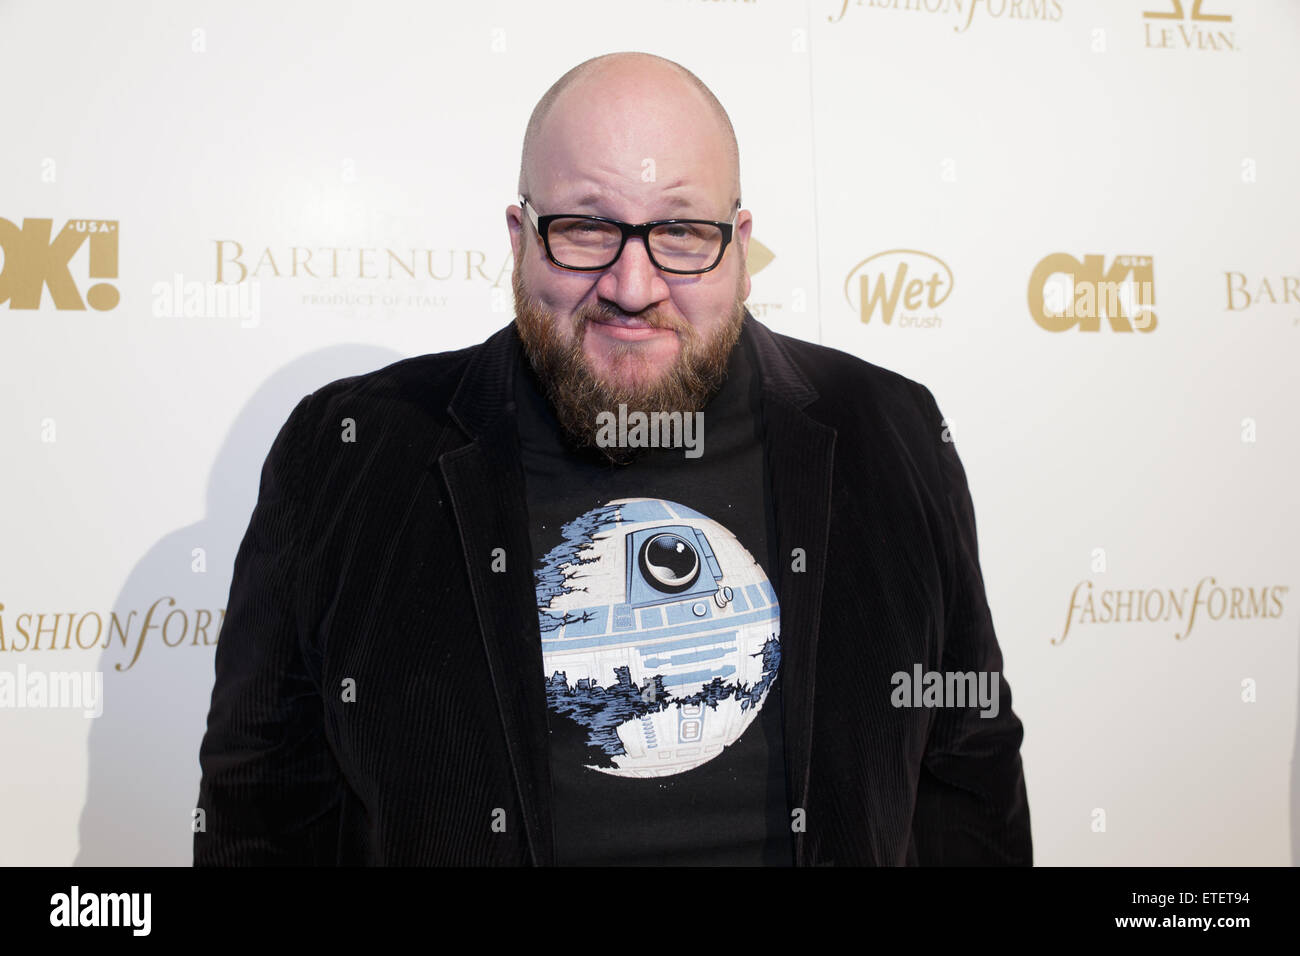 OK! Magazine pre-Grammy party at Lure Nightclub with a performance by Nico & Vinz  Featuring: Stephen Kramer Glickman Where: Hollywood, California, United States When: 05 Feb 2015 Credit: WENN.com Stock Photo